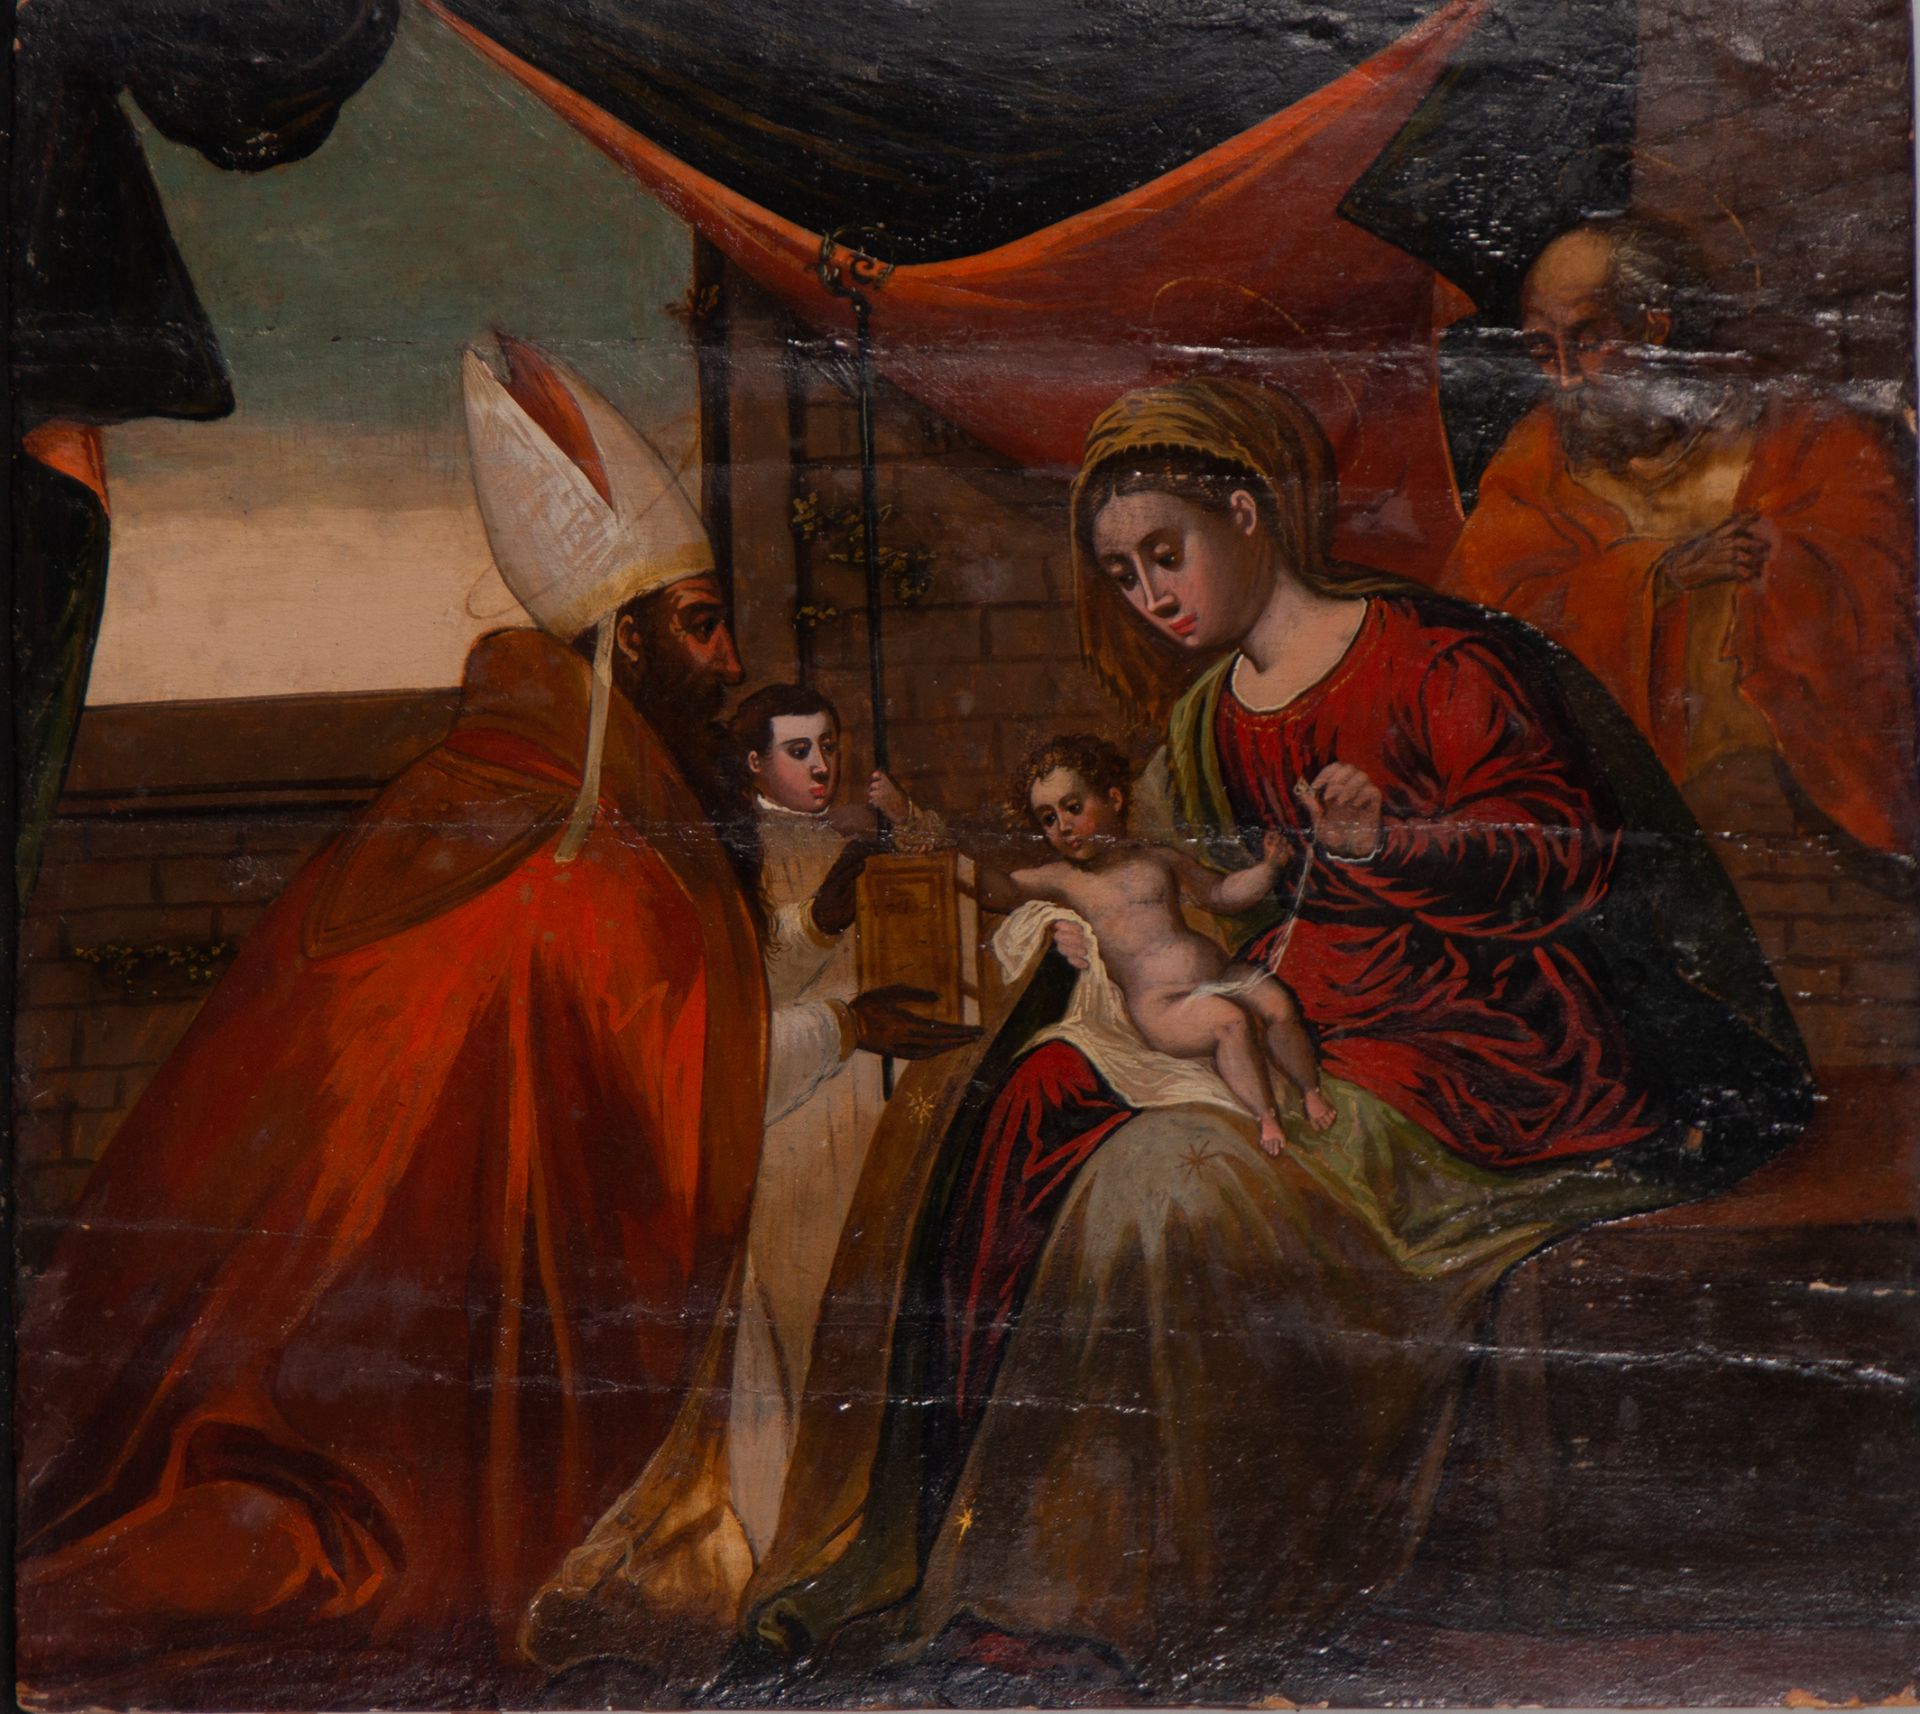 Presentation of the Child Jesus in the Temple, Italian school of the 16th century - Image 2 of 8